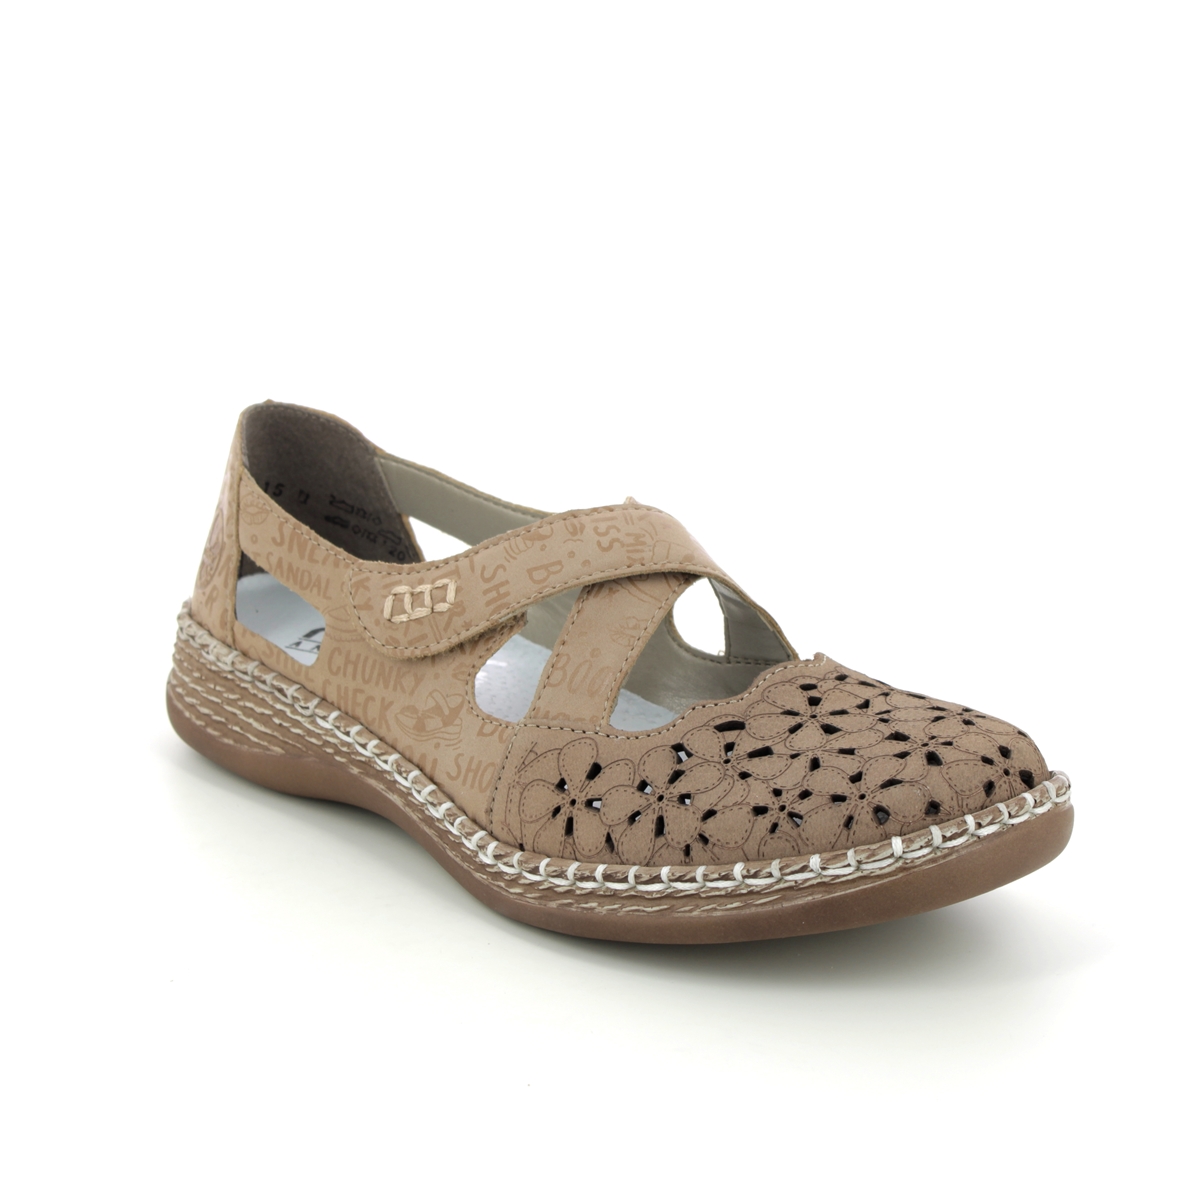 Rieker Daisbeki Light Taupe Leather Womens Mary Jane Shoes 464H4-62 In Size 38 In Plain Light Taupe Leather